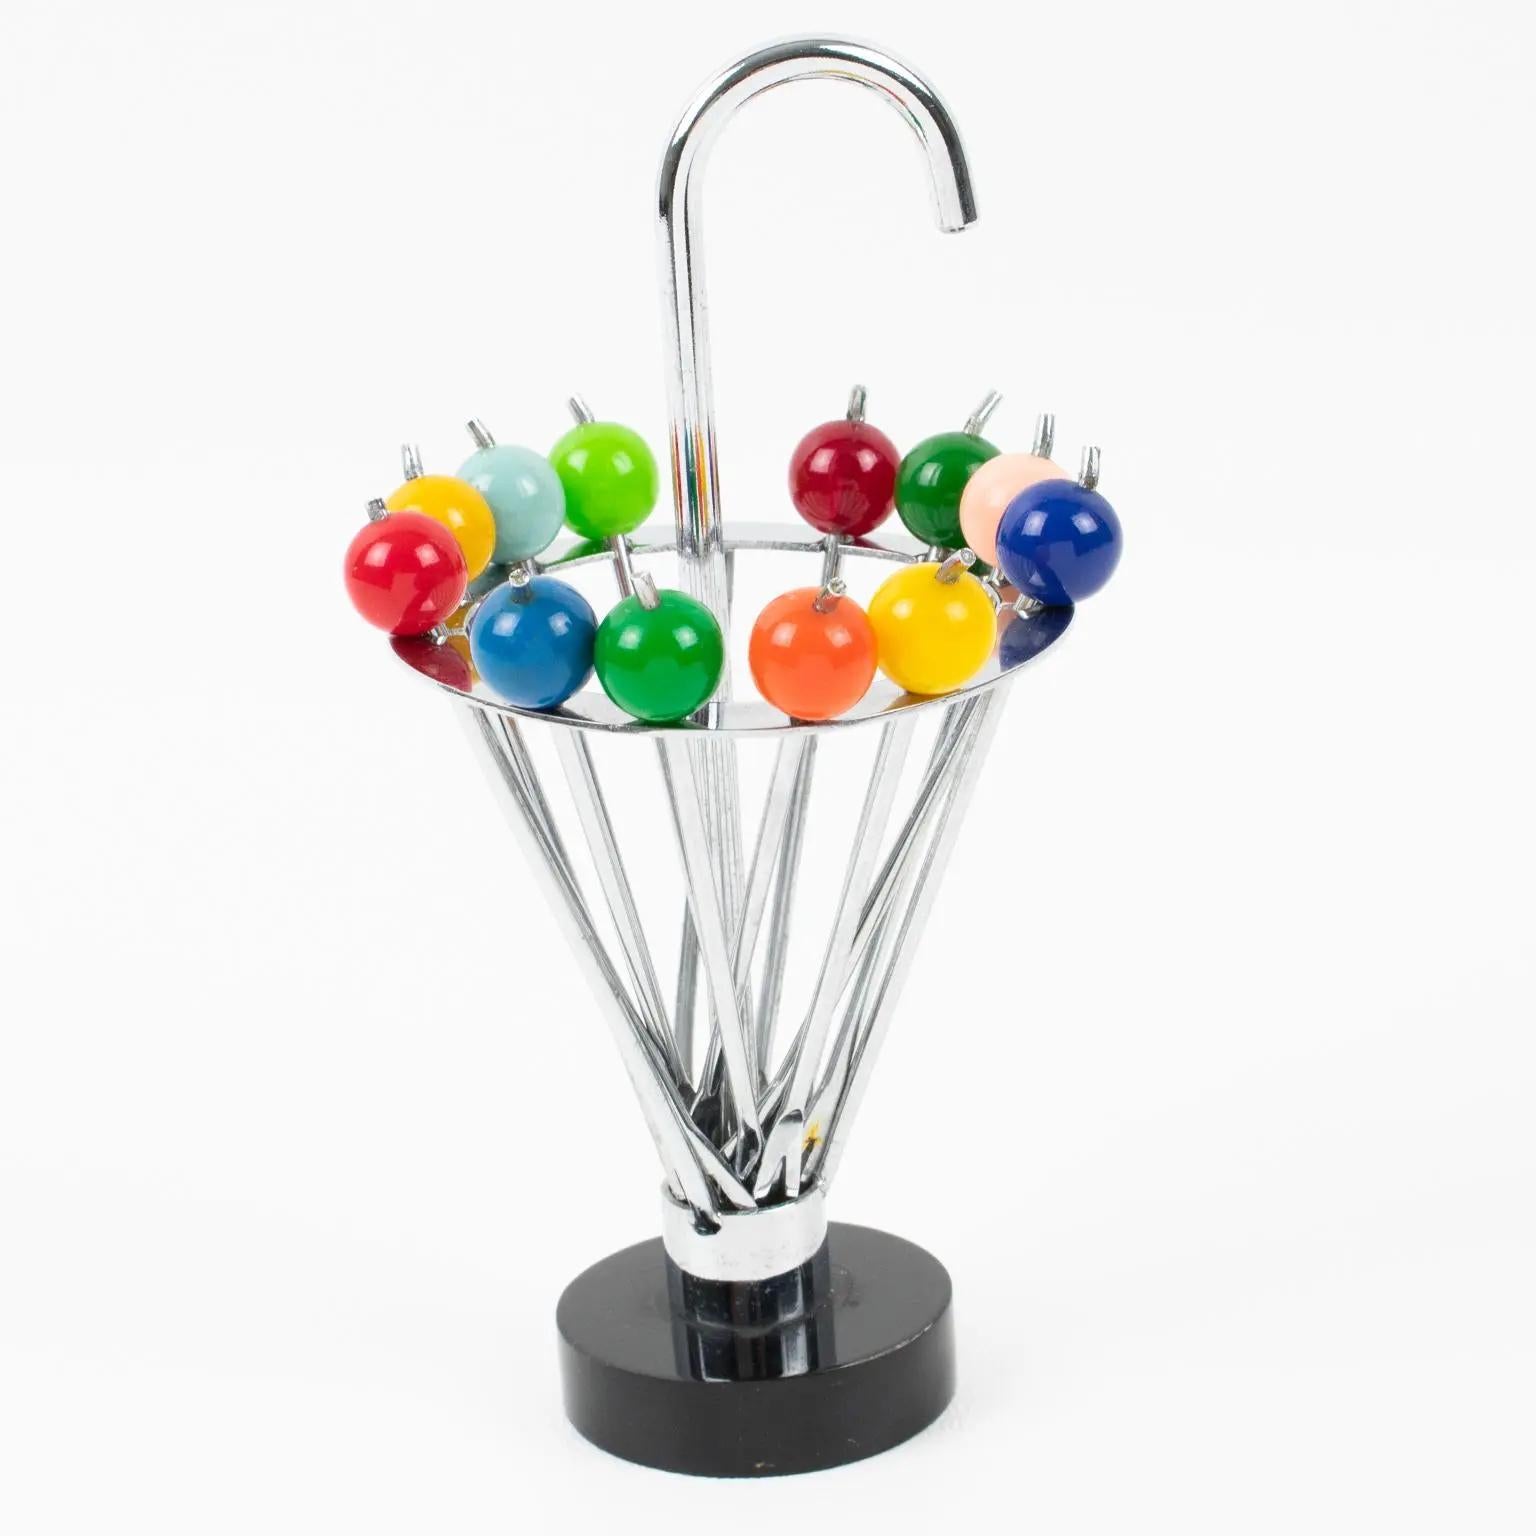 This beautiful barware serving set of French Art Deco cocktail picks features twelve picks with multicolor Lucite finial that can be removed from the metal holder, shaped like an umbrella, and be used as cocktail picks for Manhattans, Martini, or